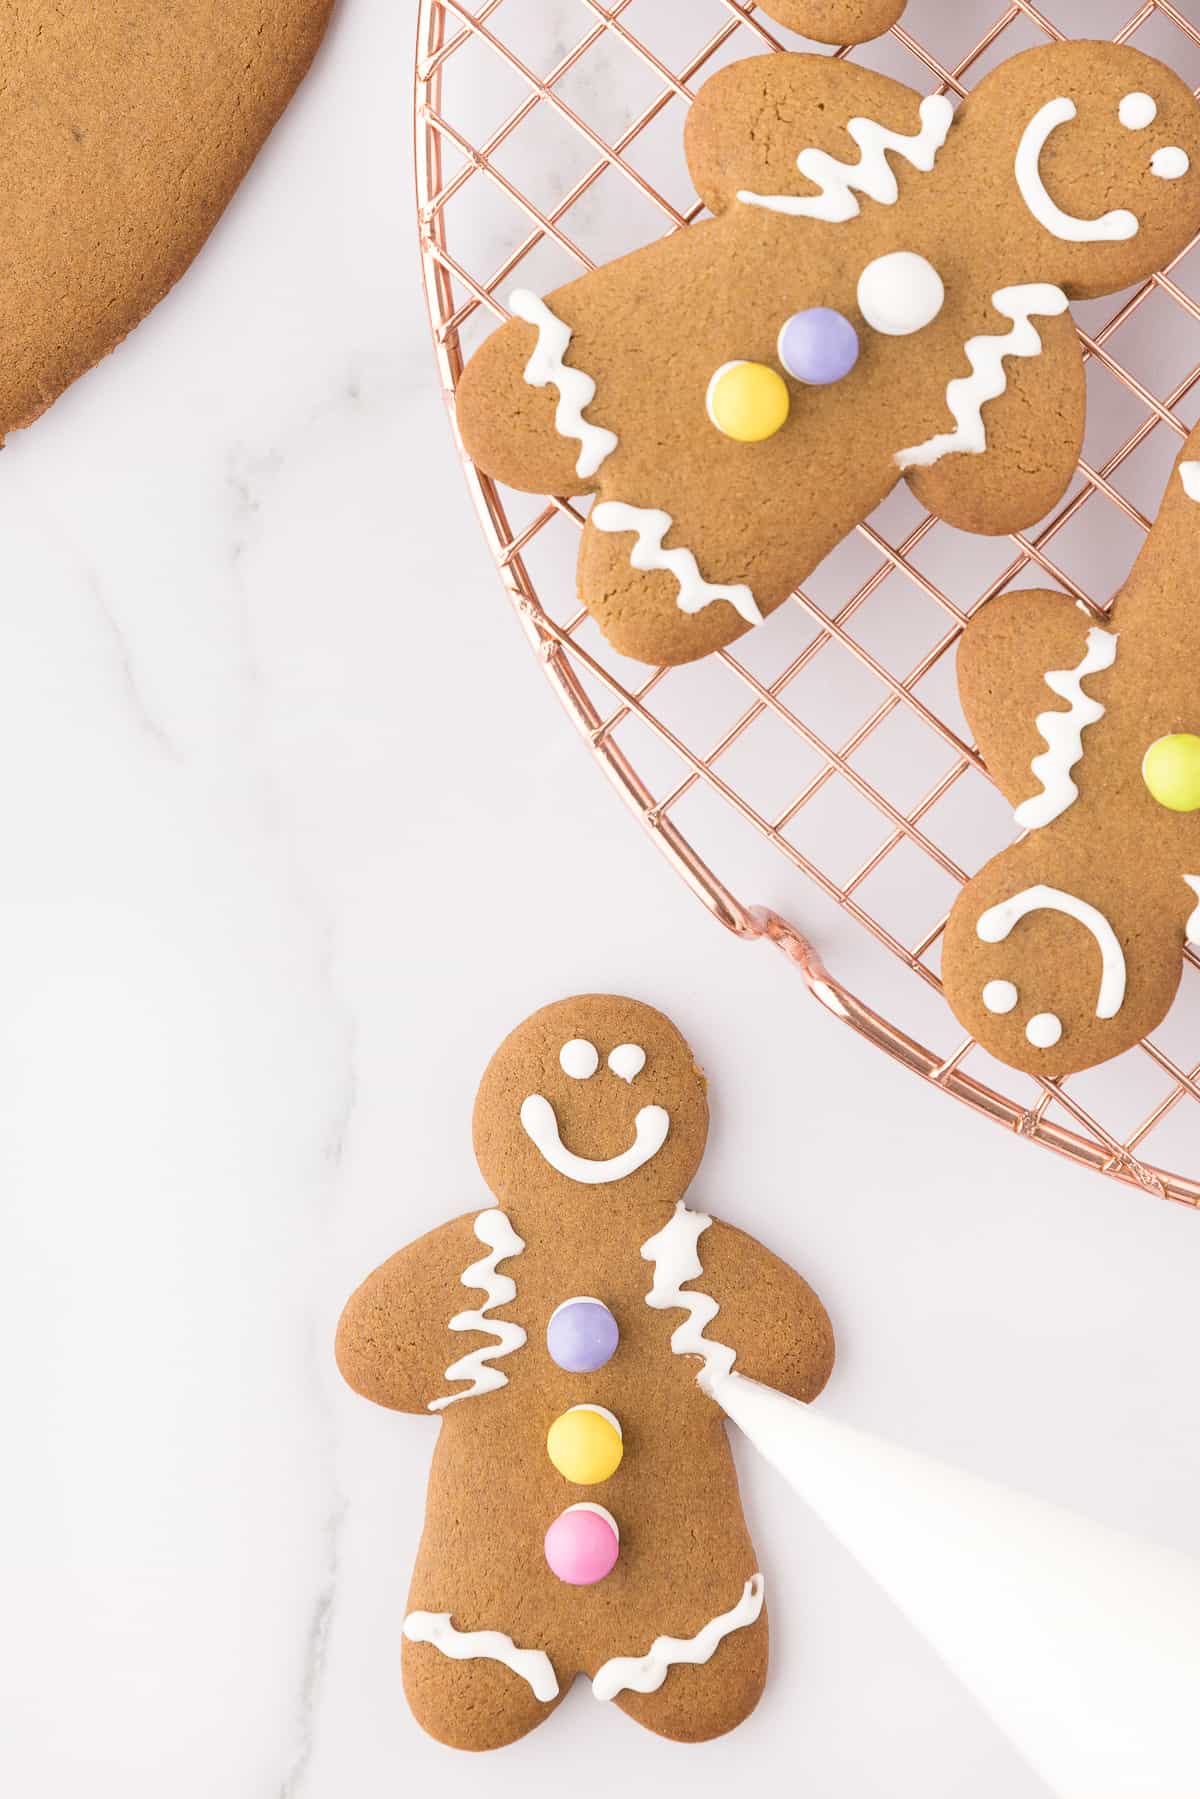 Decorating the gingerbread men with the royal icing on white background. 